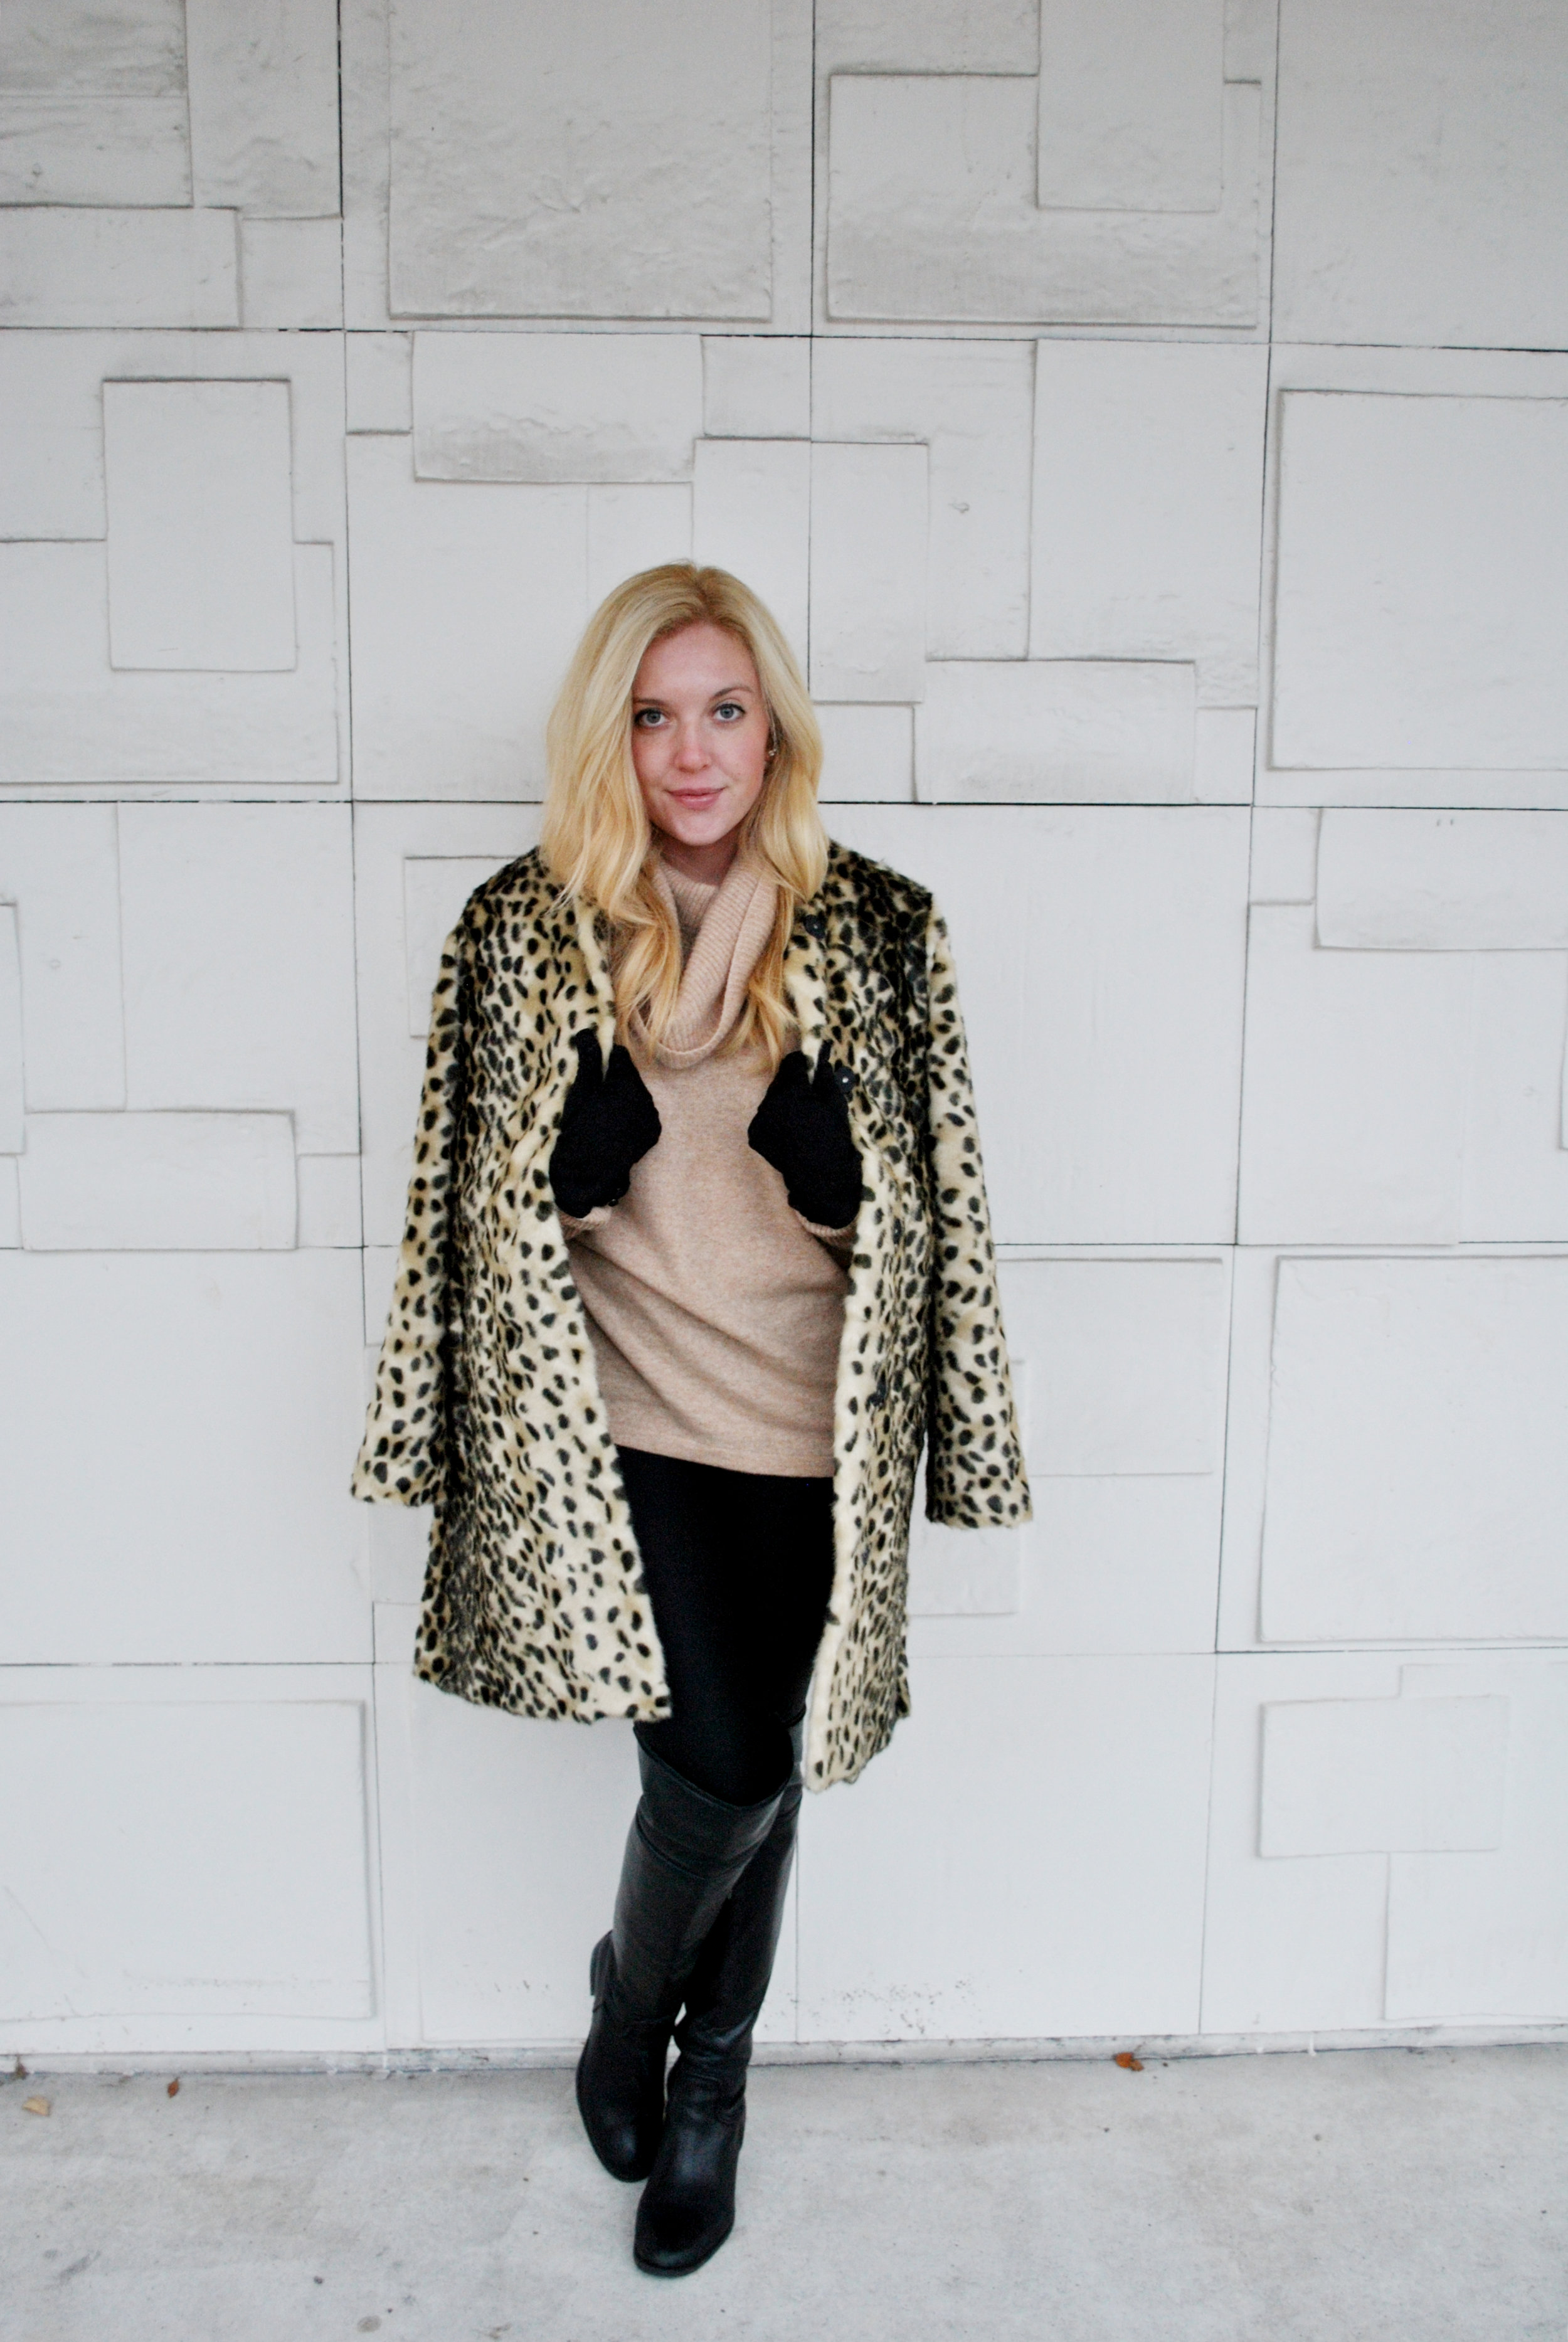 thoughtfulwish | fashion blogger, camel and leopard, camel outfit, the street chestnut hill, wings, angel wings, leopard coat, blonde blogger, preppy, luxe style, boston, meredith wish